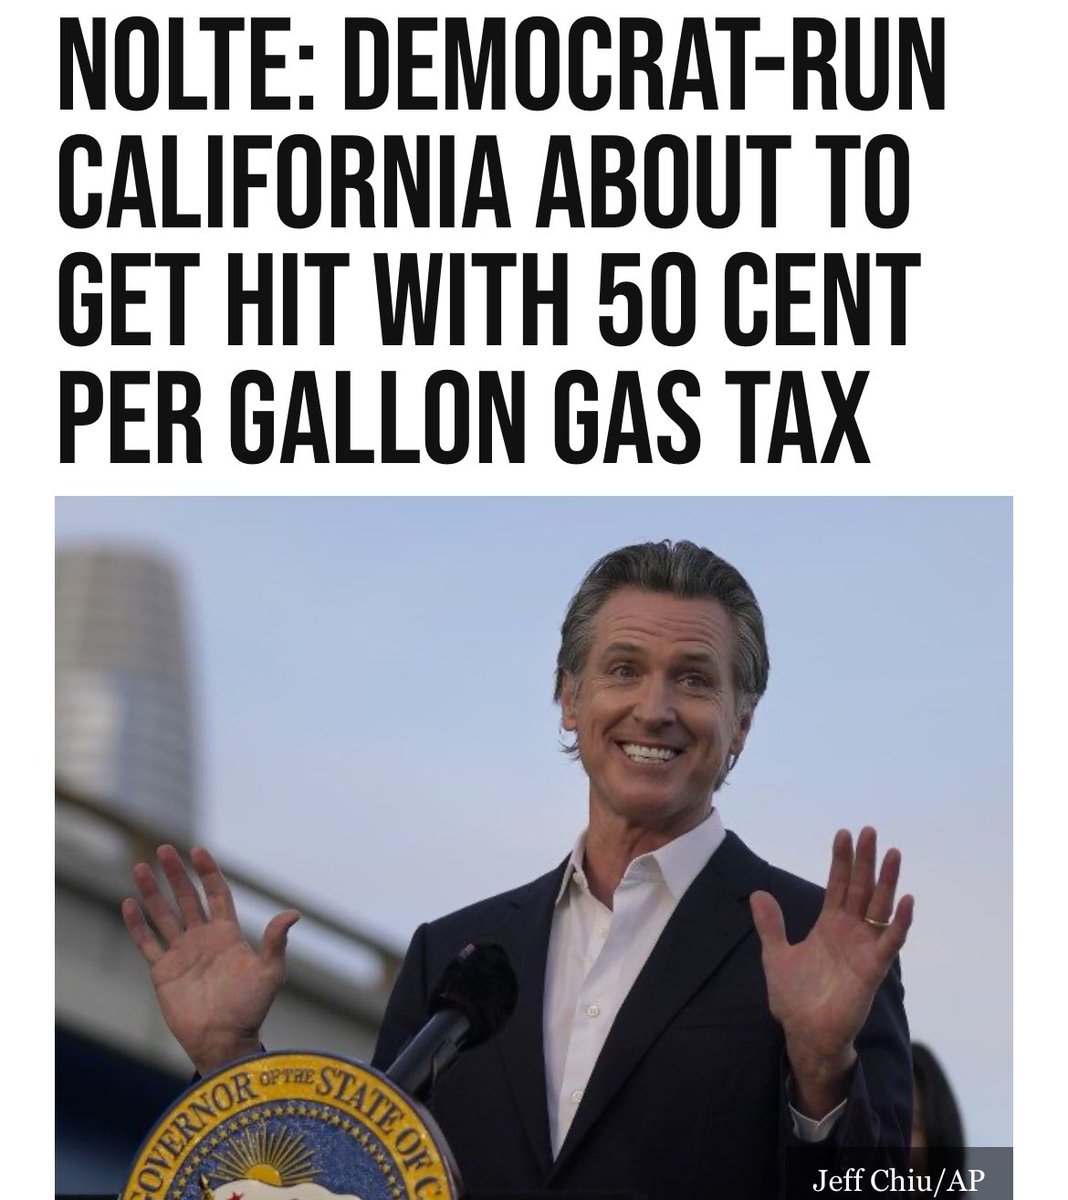 The lowest price of gasoline in California is still over $5 a gallon, now add a 50 cent gas tax to that Gavin Newsom is laughing all the way to the bank thanks to his loyal voters 😂 Liberals are dumb af